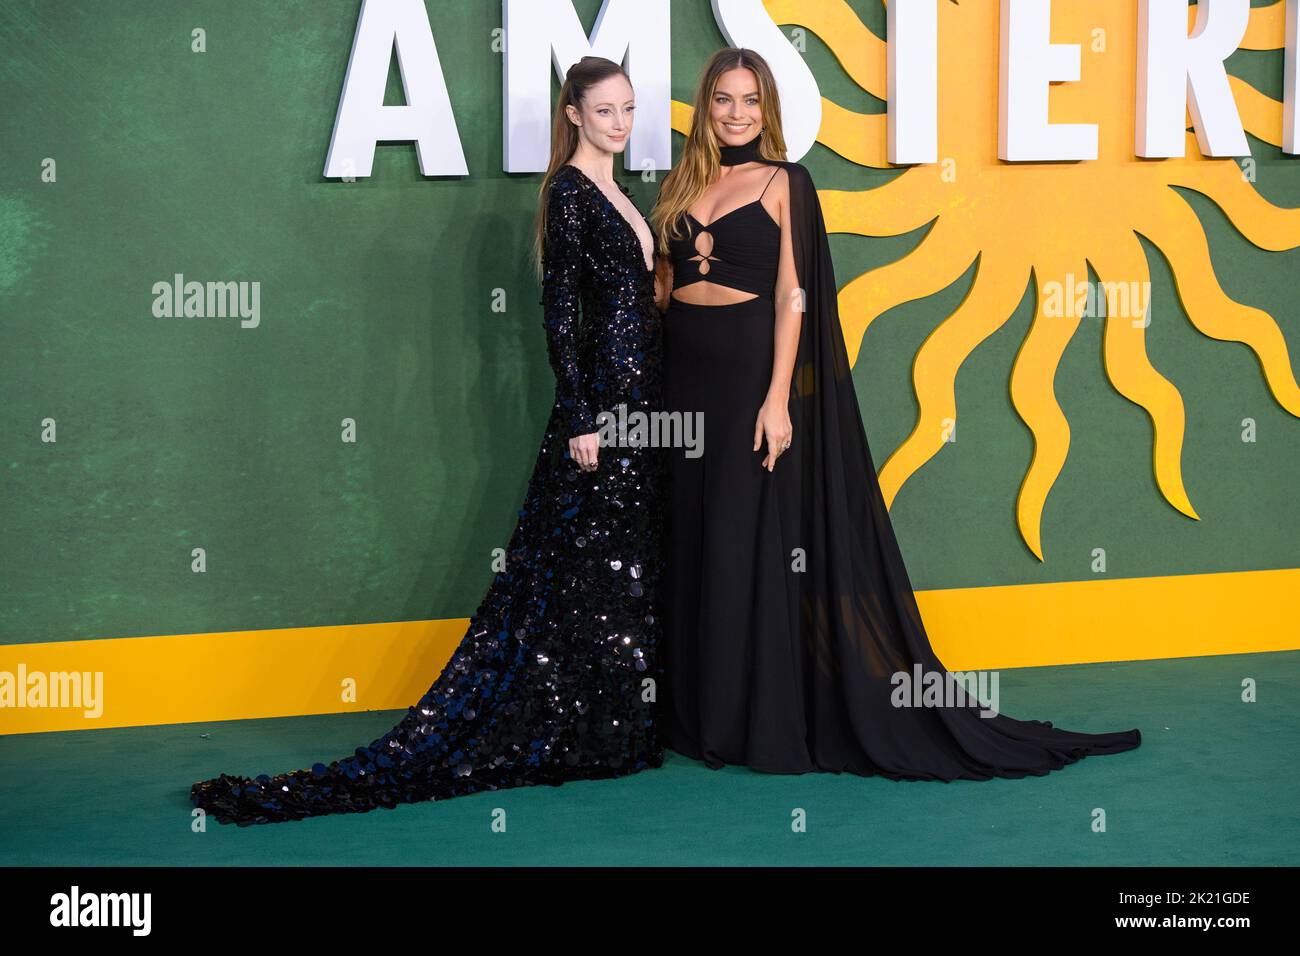 London, UK. 21 September 2022. Andrea Riseborough and Margot Robbie attending the European premiere of Amsterdam at the Odeon Luxe Leicester Square Cinema, London Picture date: Wednesday September 21, 2022. Photo credit should read: Matt Crossick/Empics/Alamy Live News Stock Photo